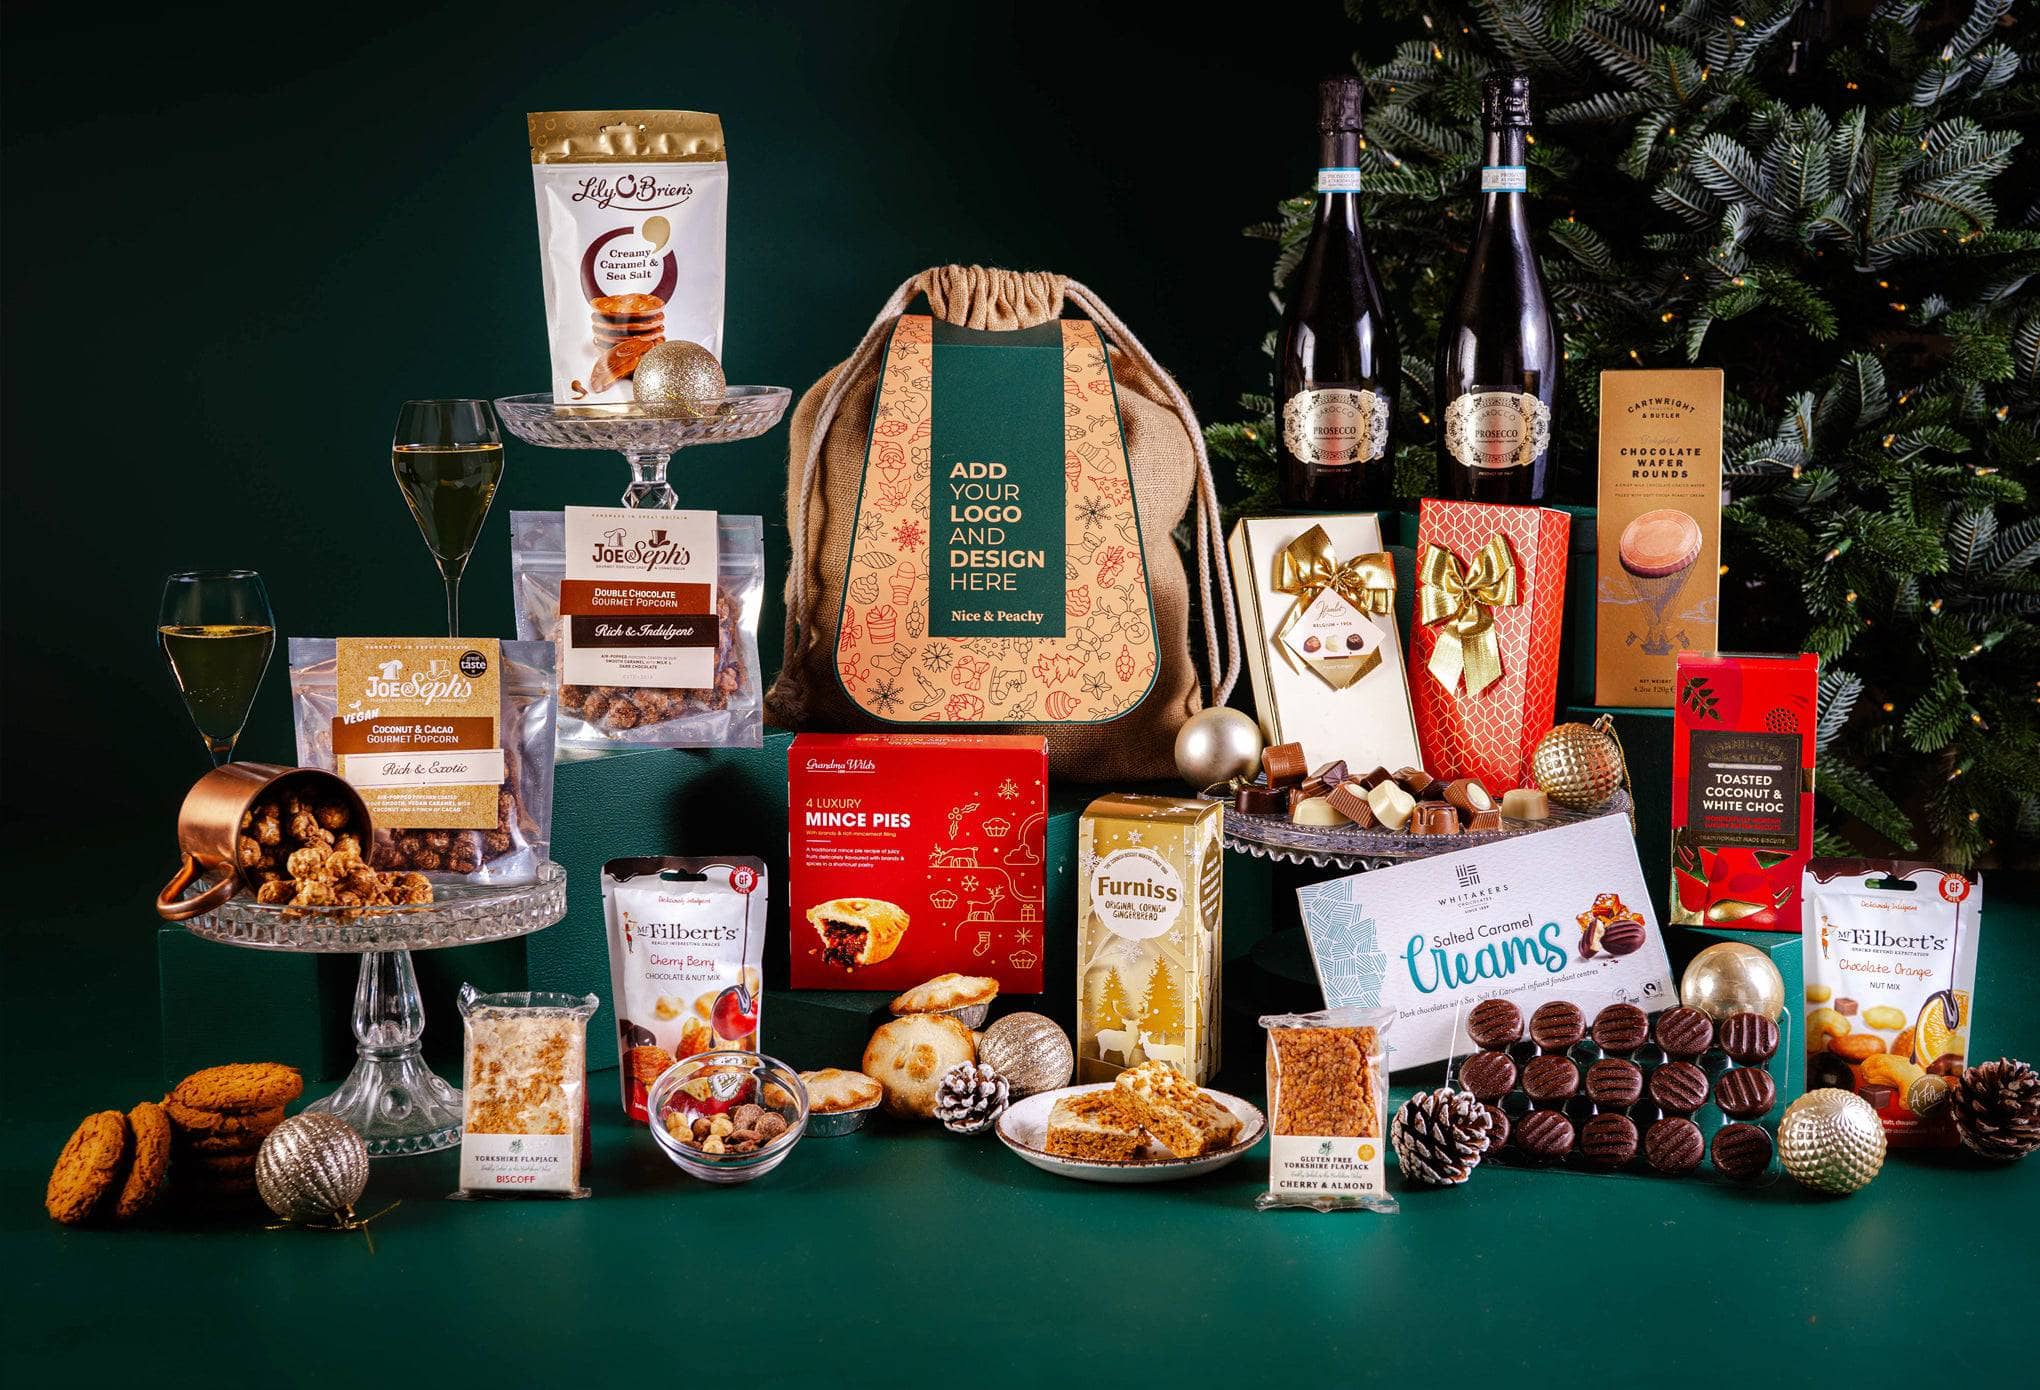 Peach Hampers Corporate Hampers Award-Winning Two Bottles of Prosecco Christmas Party Sharing Hamper With Drinks